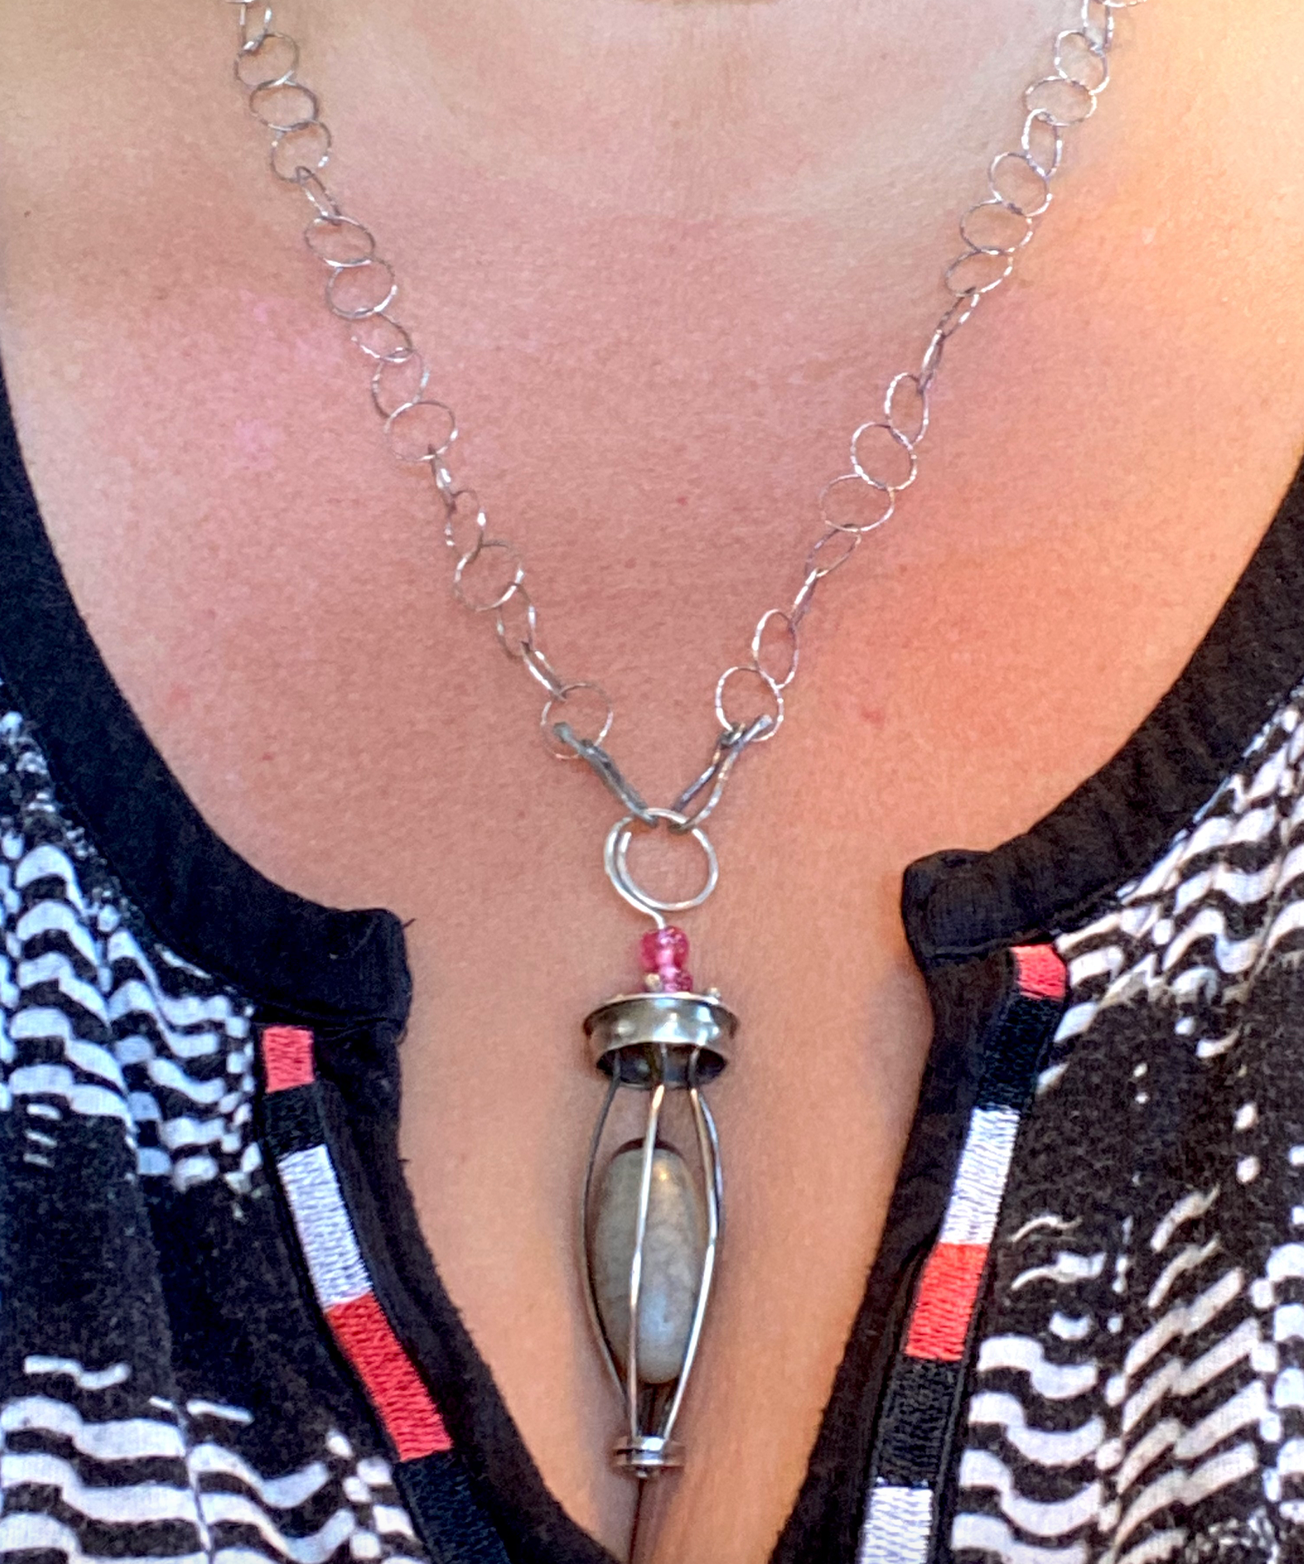 Lingam stone in sterling silver cage with adjustable length sterling silver chain - up to 24" - that can attach in front or in back, with unique handcrafted clasps .